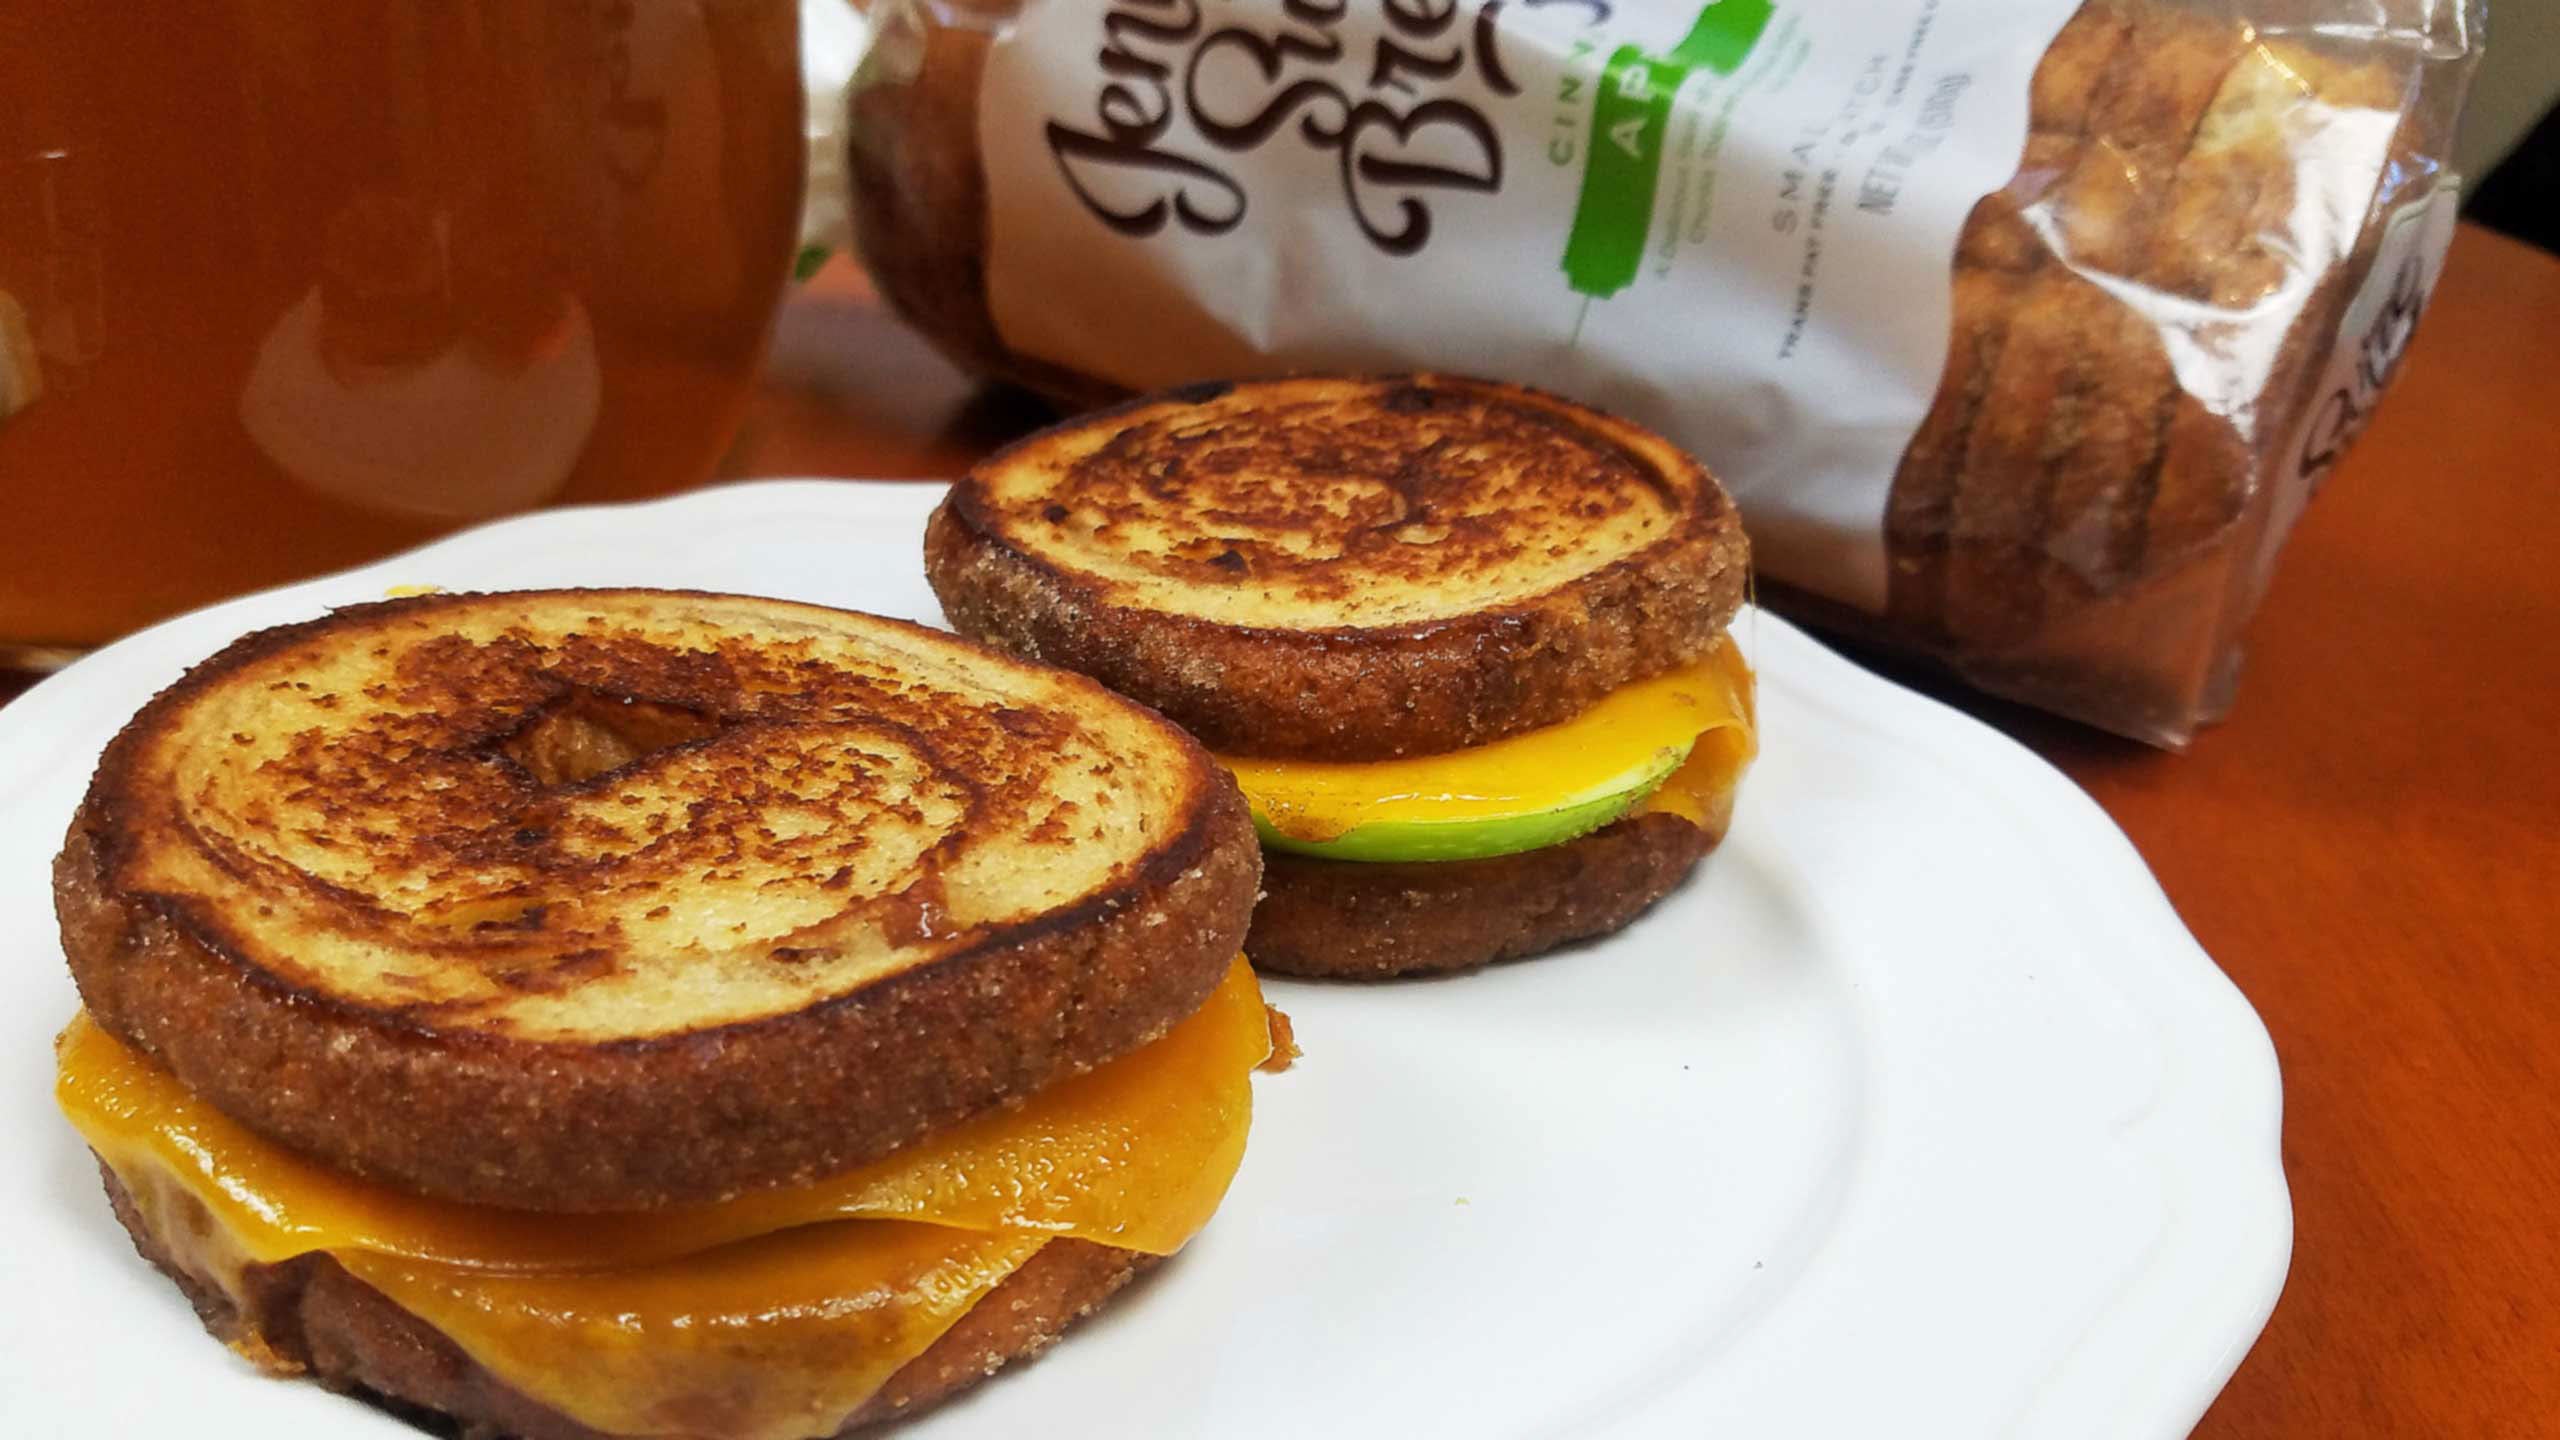 Cinnamon, Apple and Cheddar Grilled Cheese